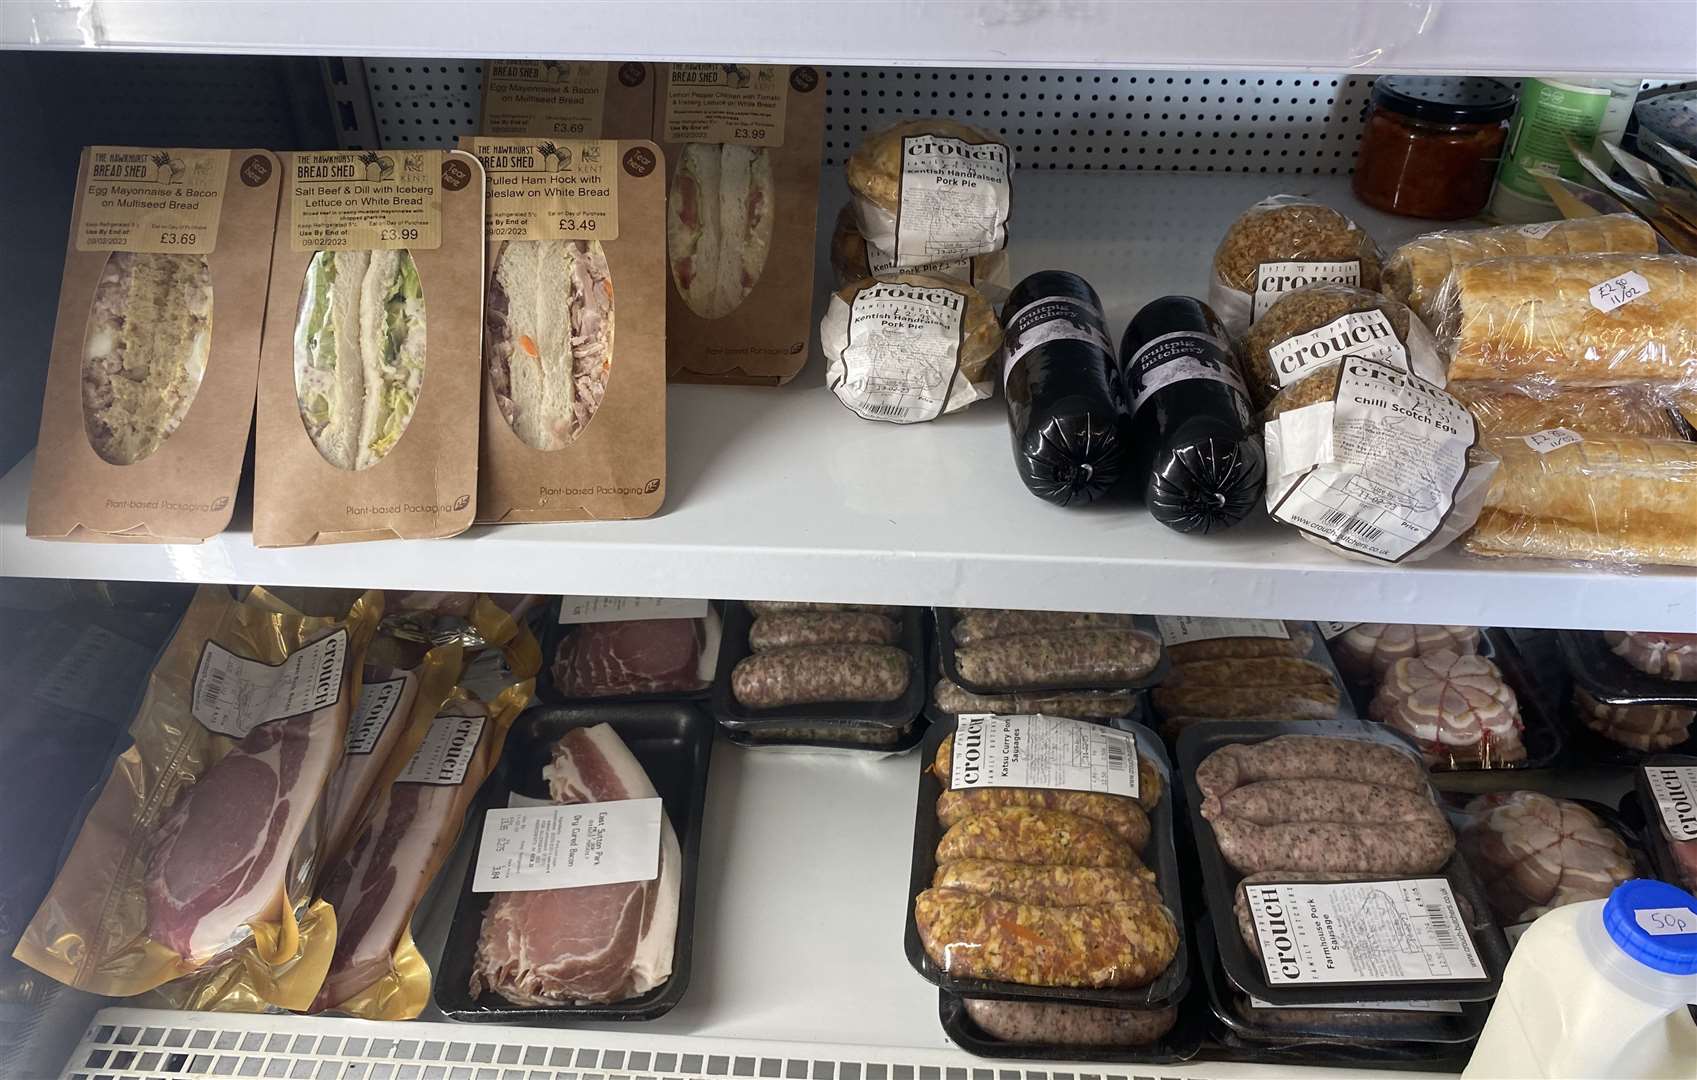 The shop was offering a range of meat and sandwiches